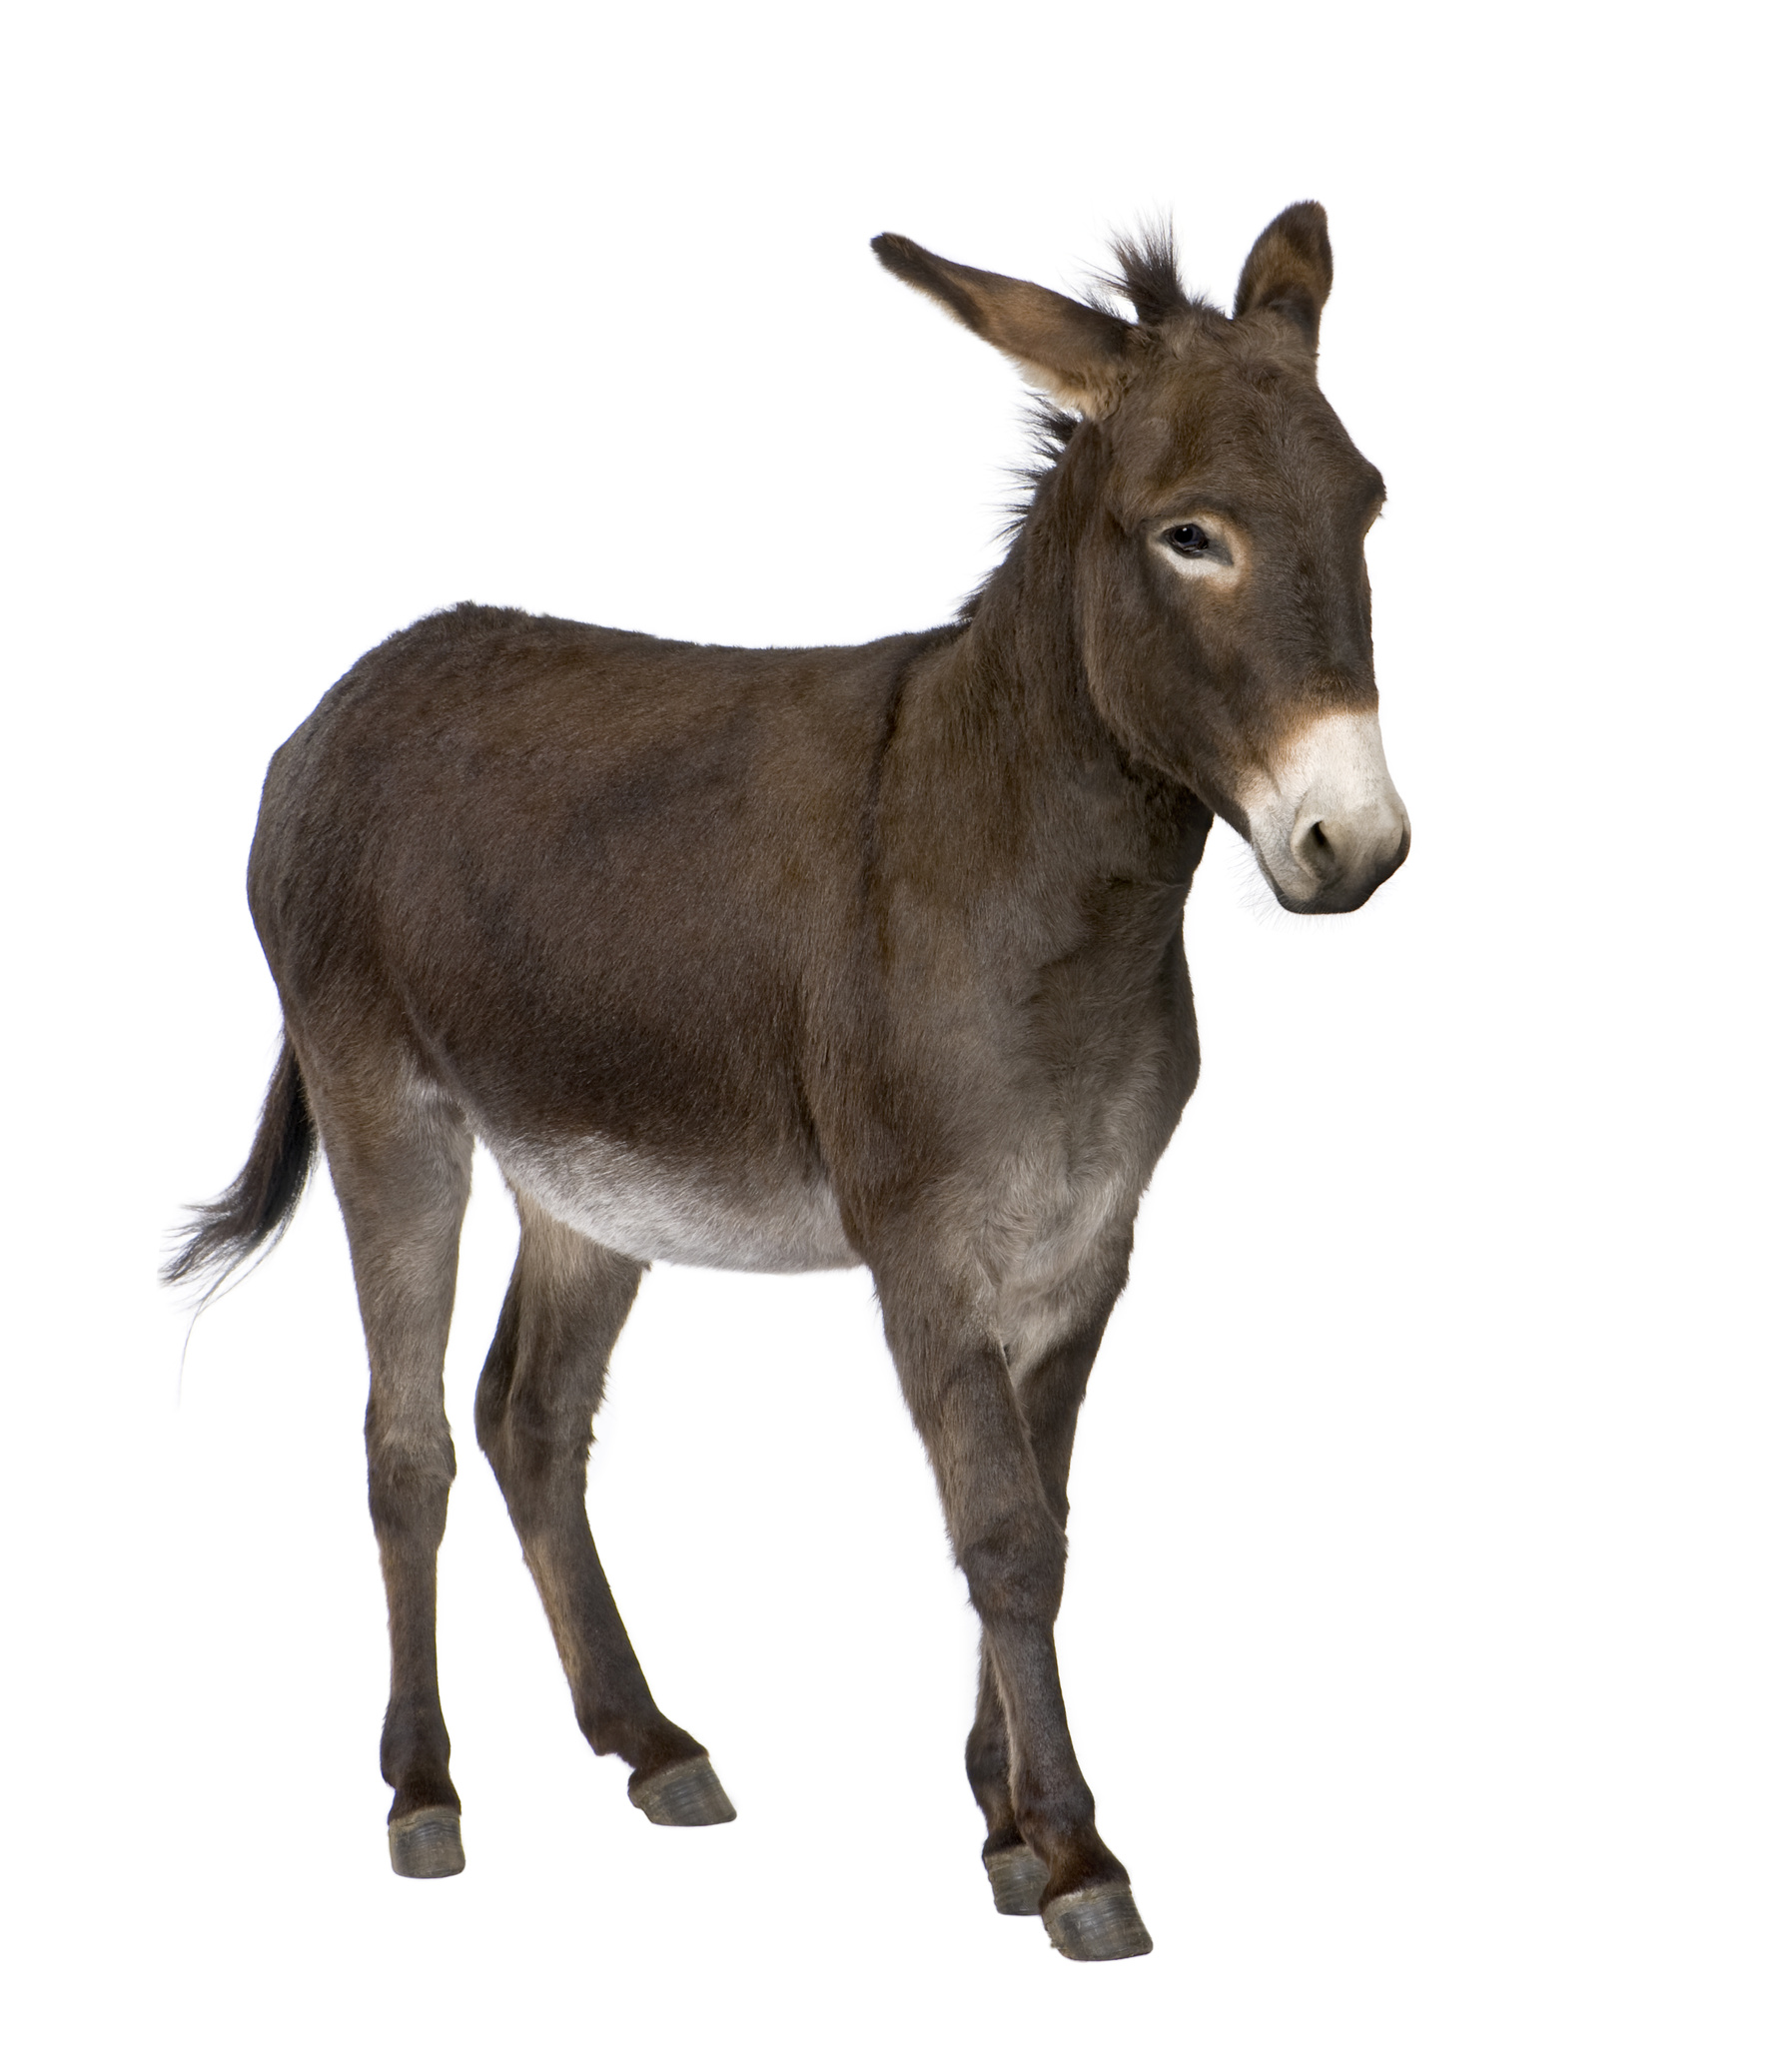 Donkey history and some interesting facts